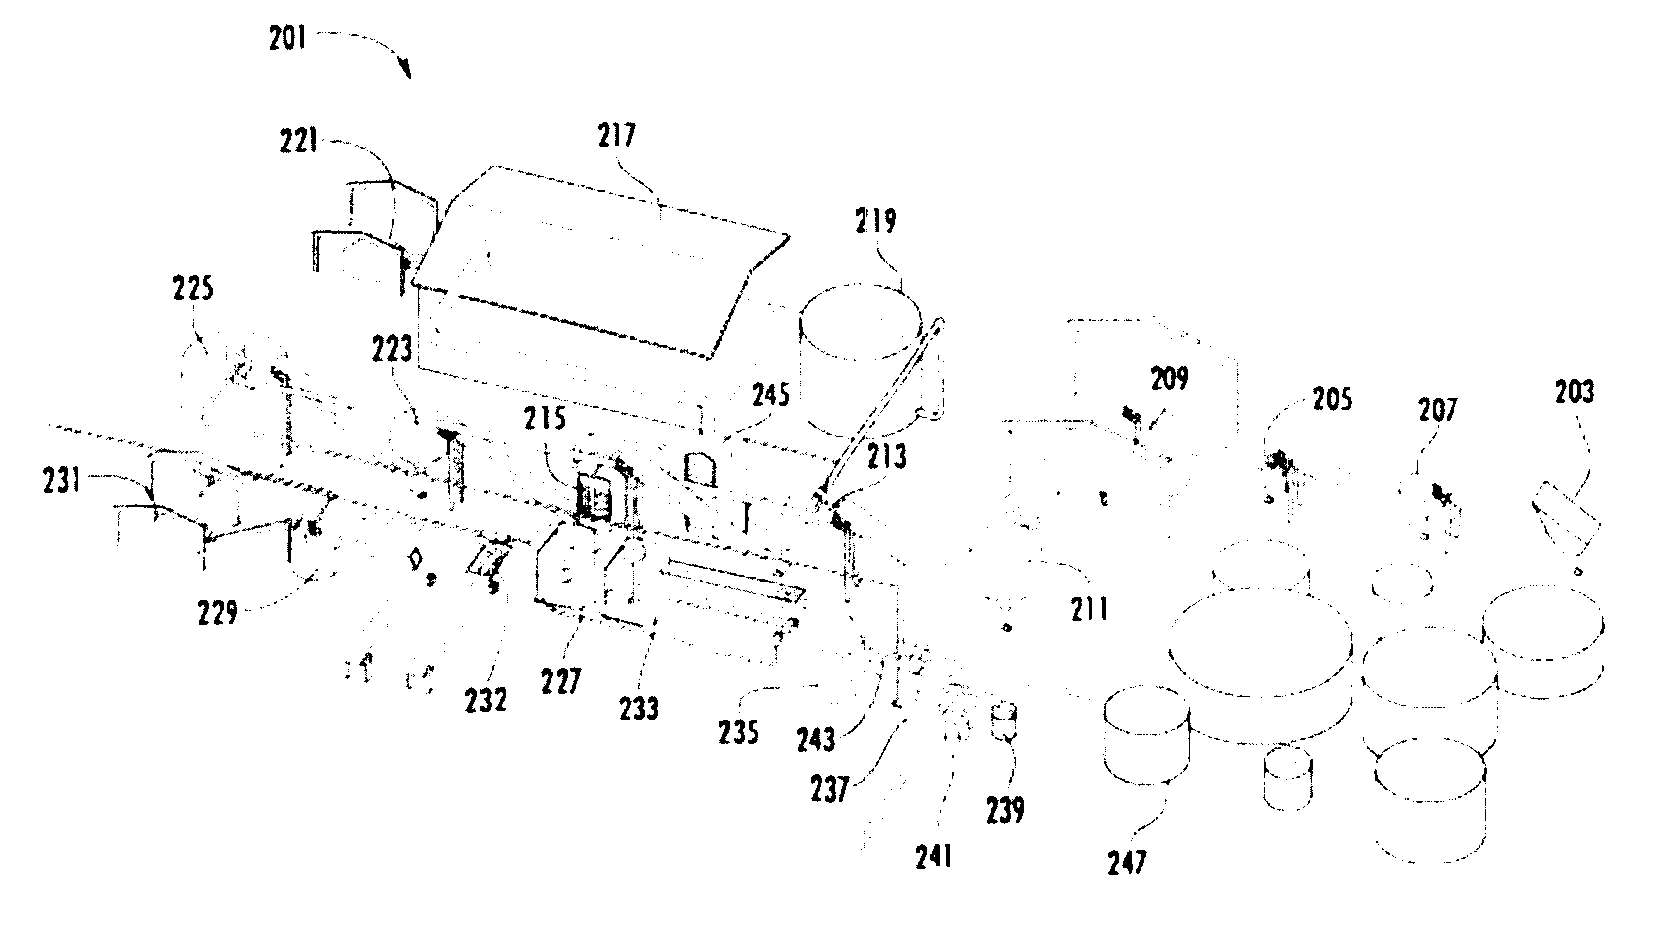 System and Method for Recovery of Nickel Values From Nickel-Containing Ores